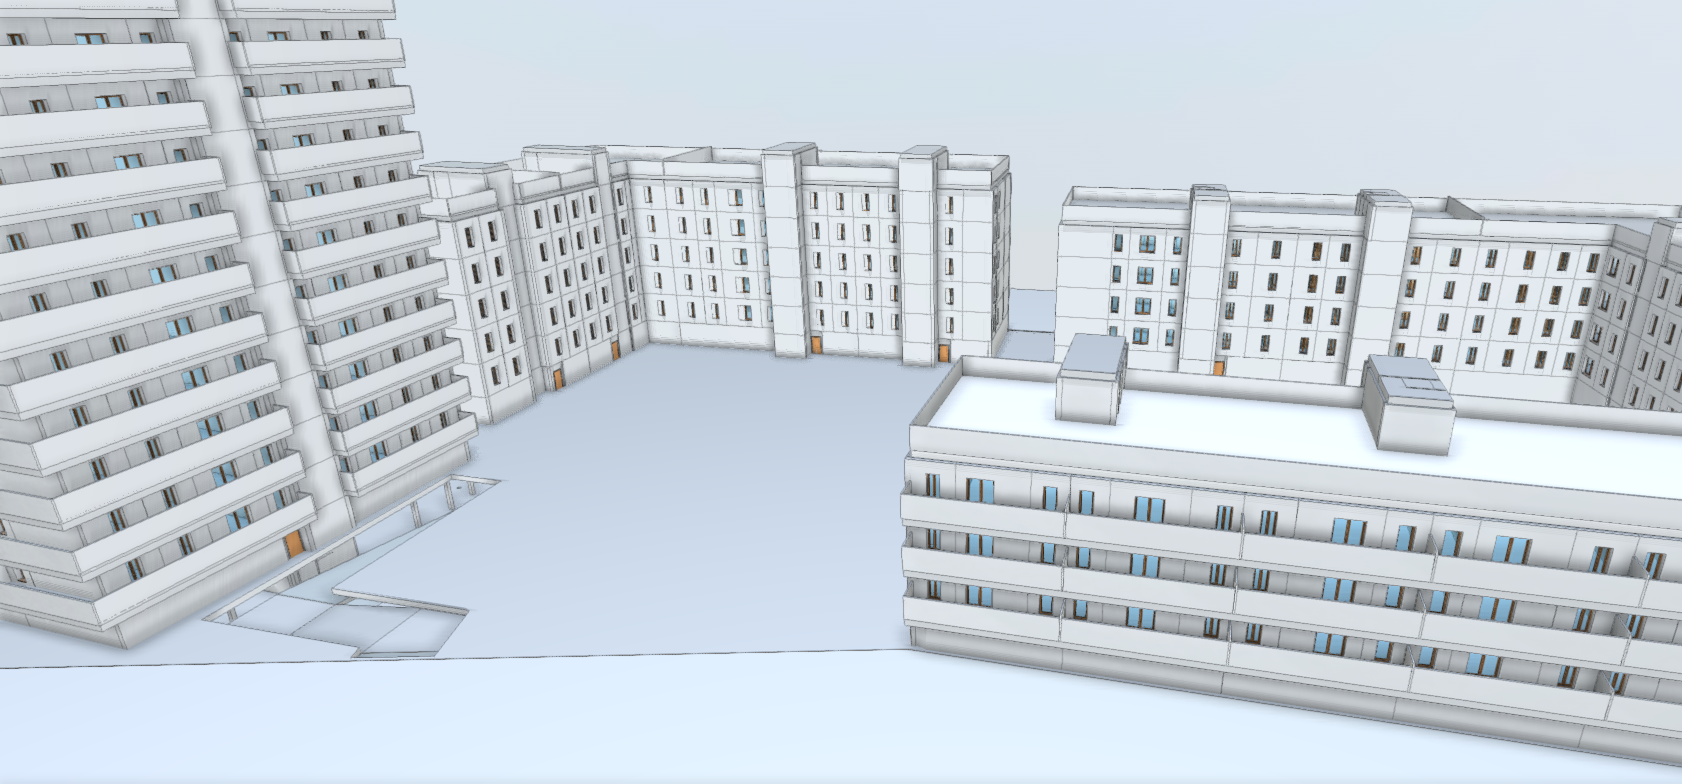 BIM Image Exported from ARCHITEChTURES